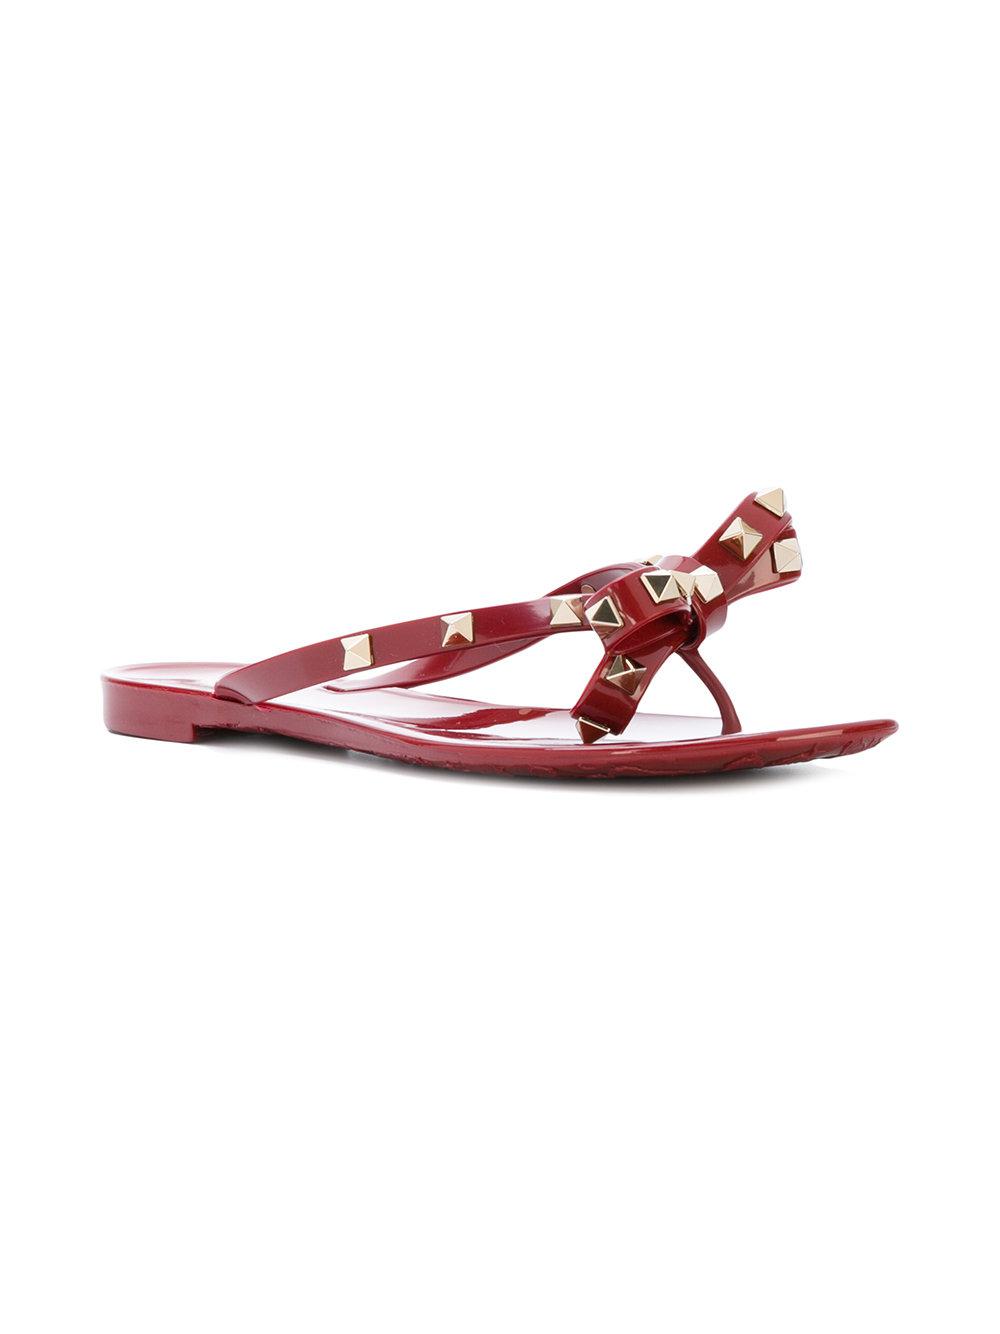 Valentino Jelly Rockstud Flat Thong Sandals in Red | Lyst